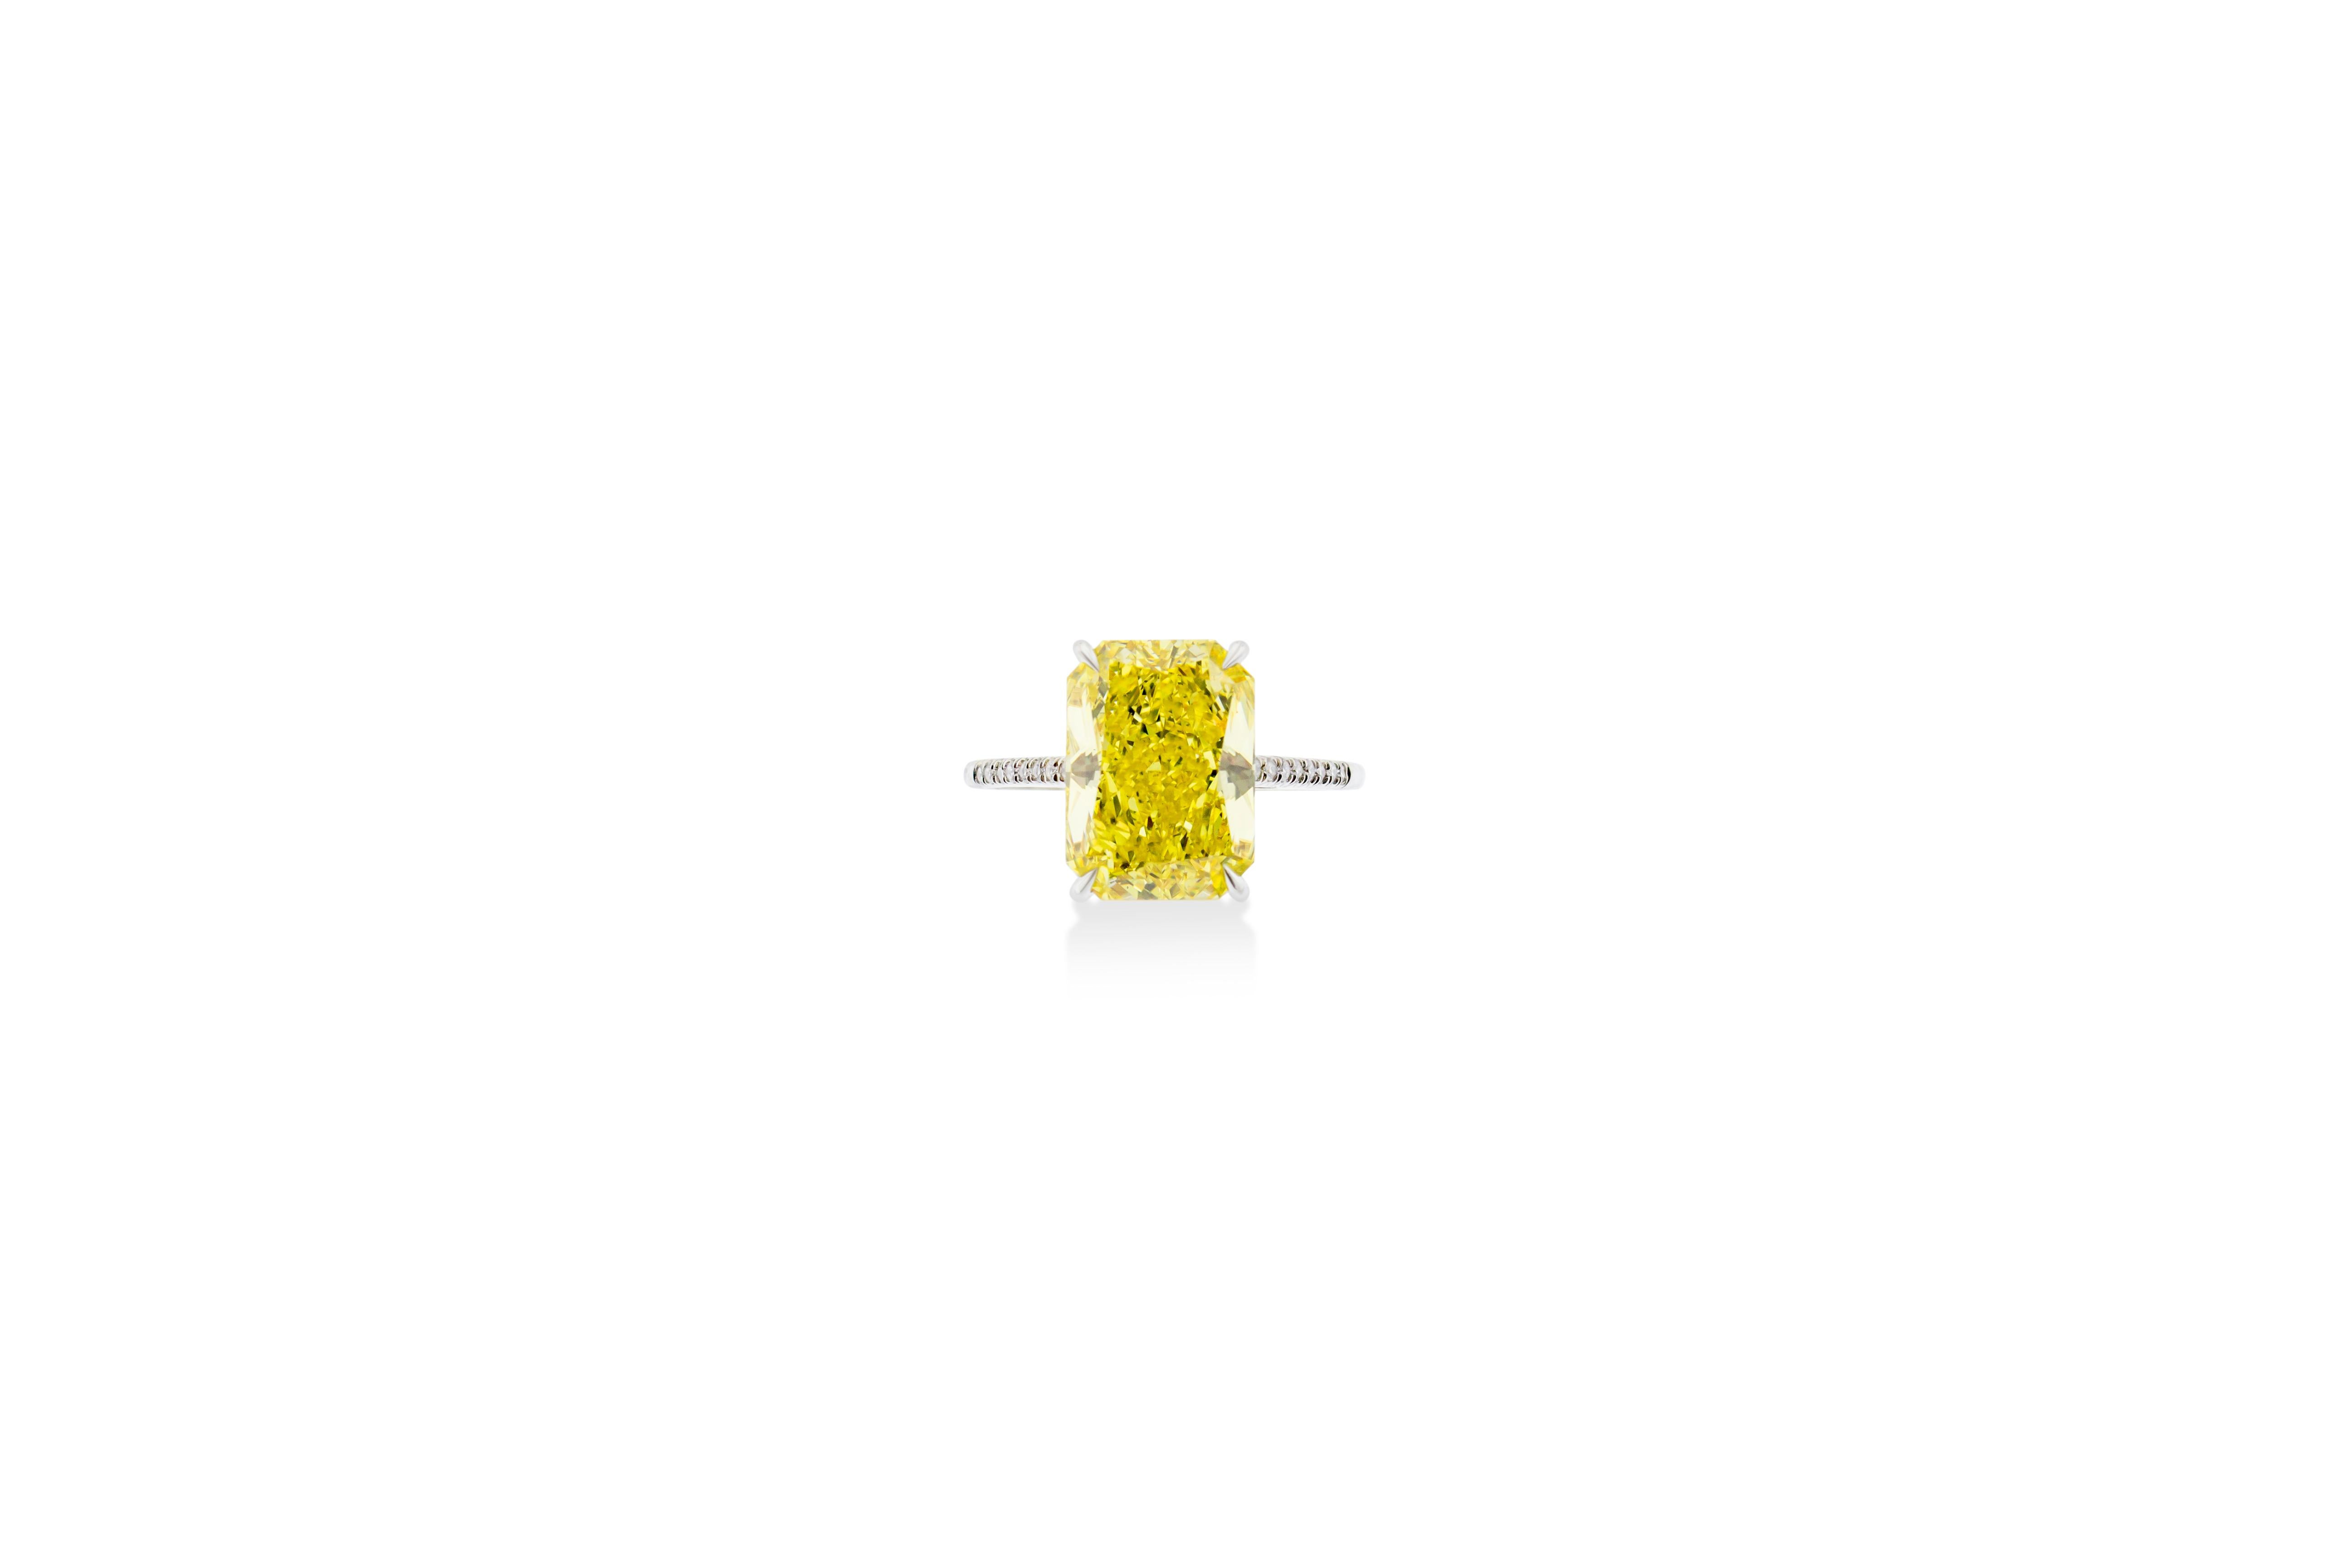 Fancy vivid yellow 5.04 carat rectangular radiant cut diamond engagement ring. Mounted in 2.7g of Platinum with a delicate thin  half diamond pave encrusted band. GIA Certified. Certificate No. 6183449015. Size 6.5.

Resizing available upon request.